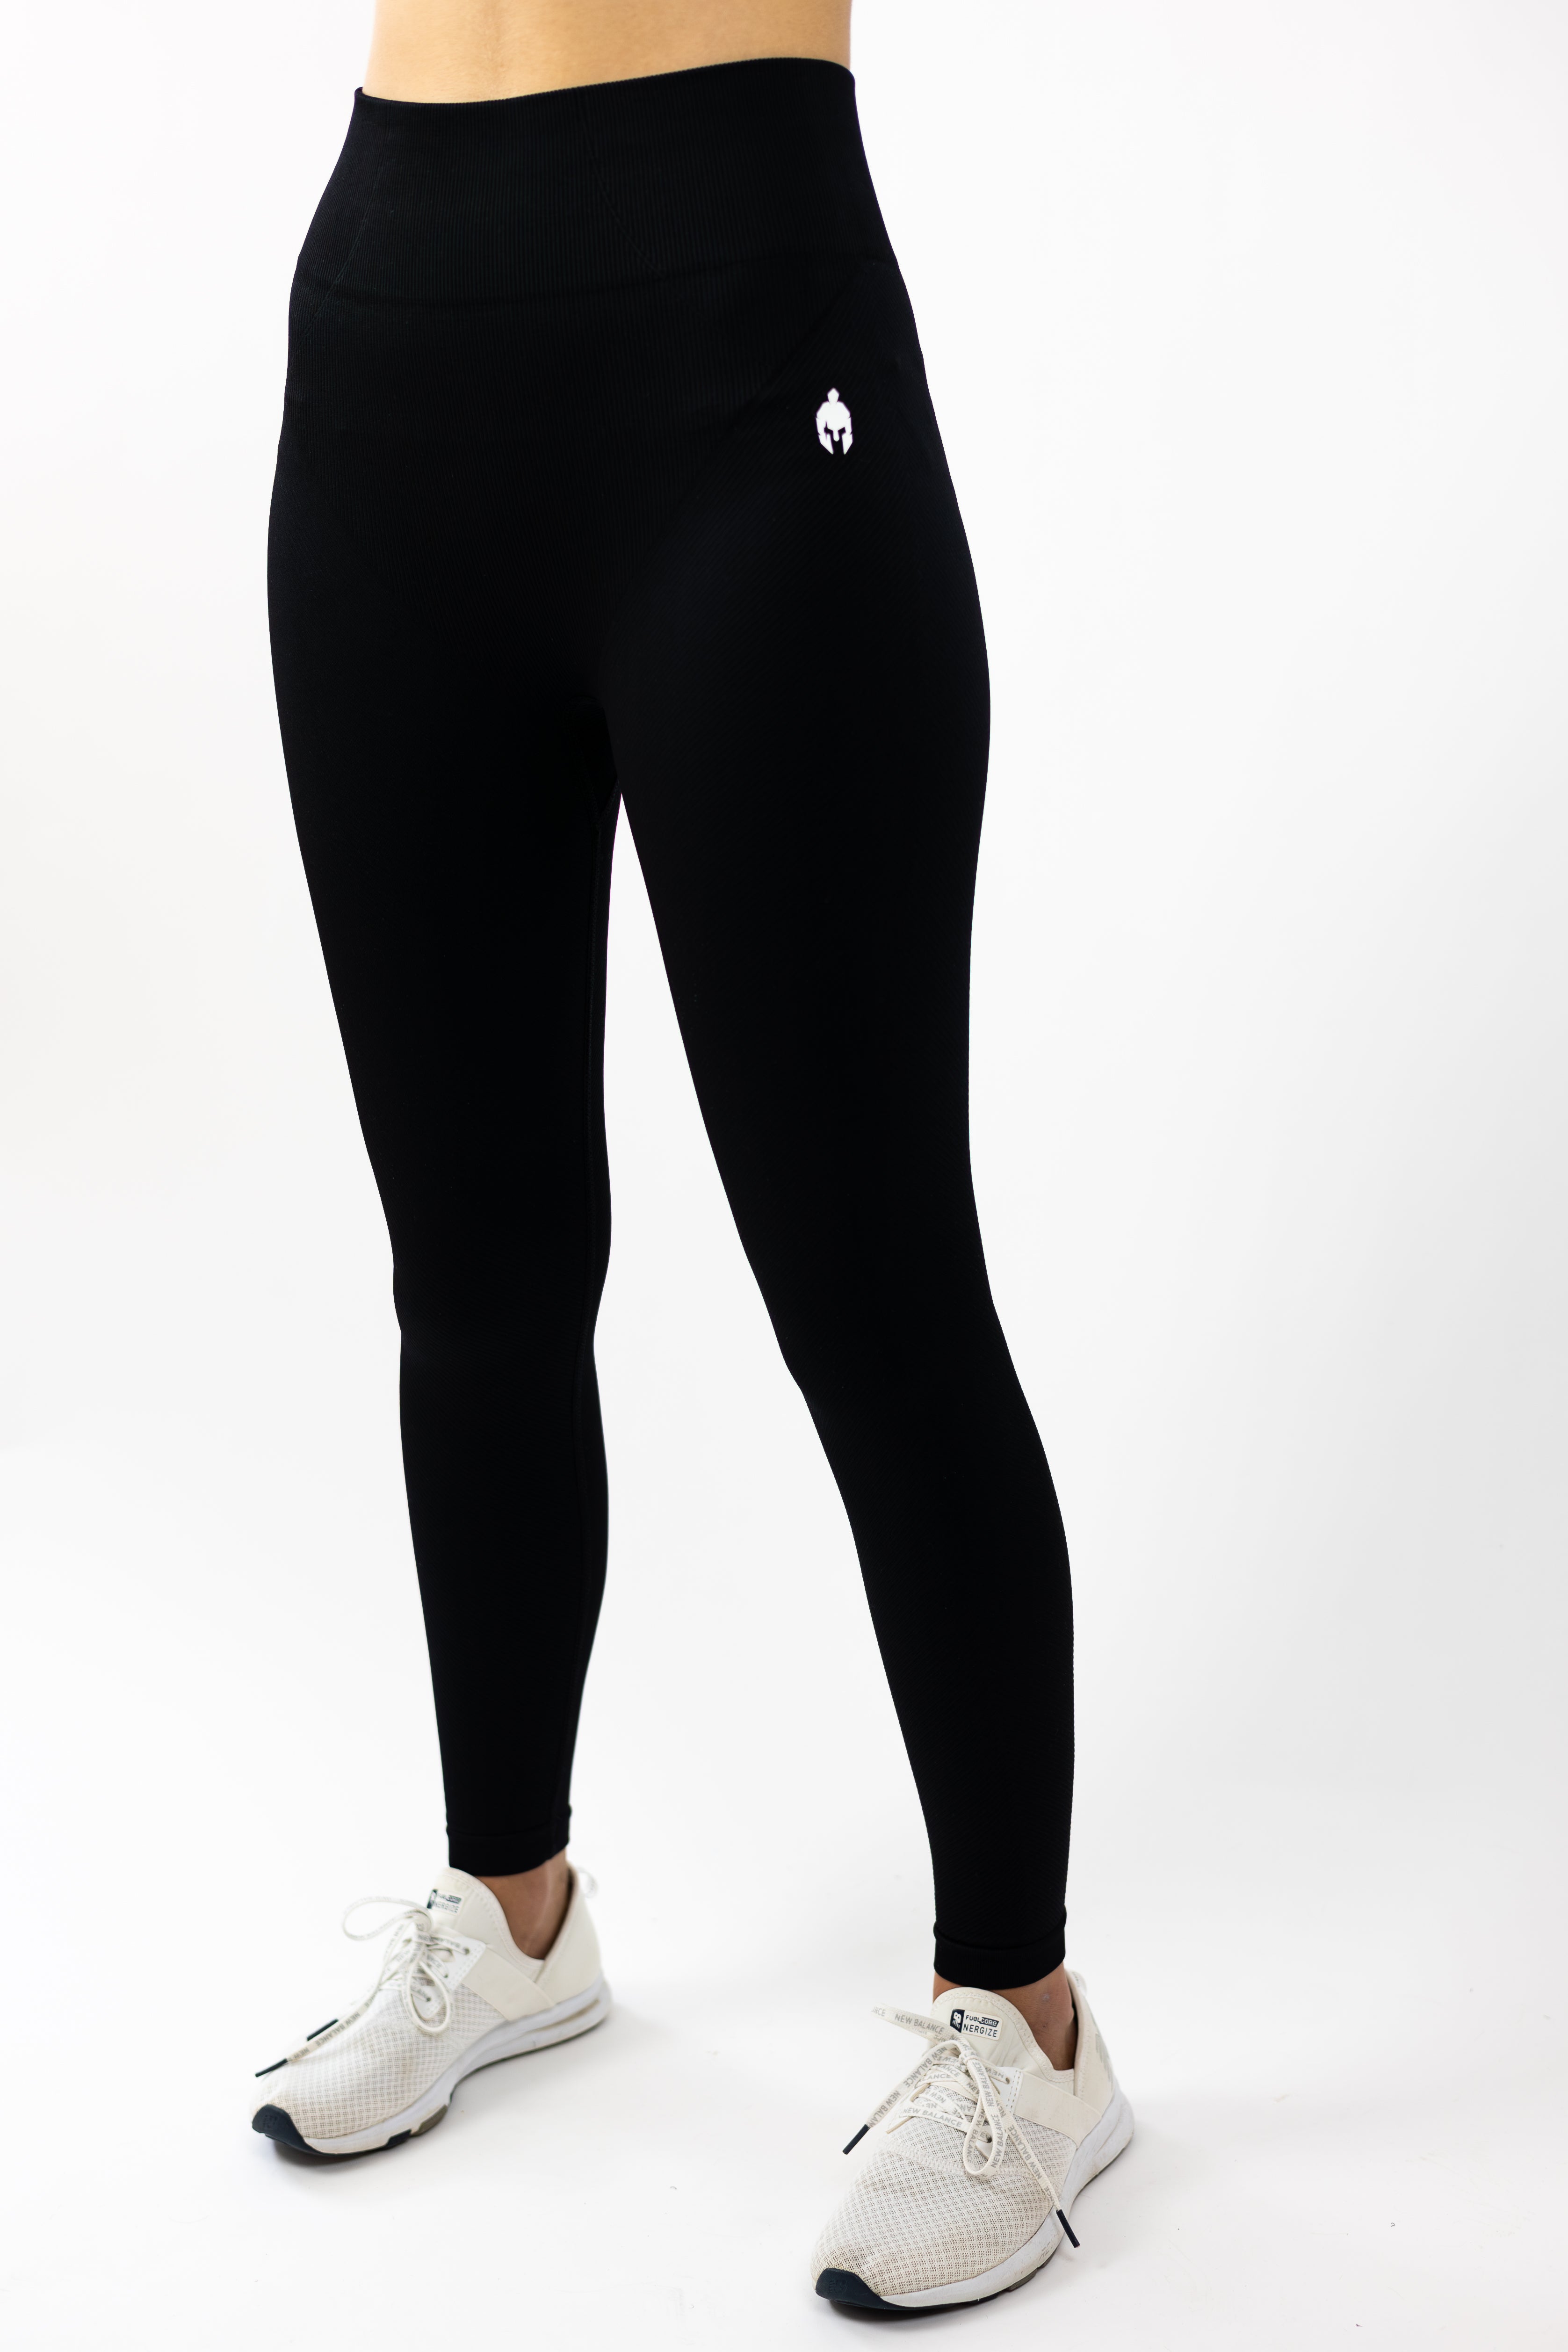 woman modeling Strength of One black seamless workout leggings